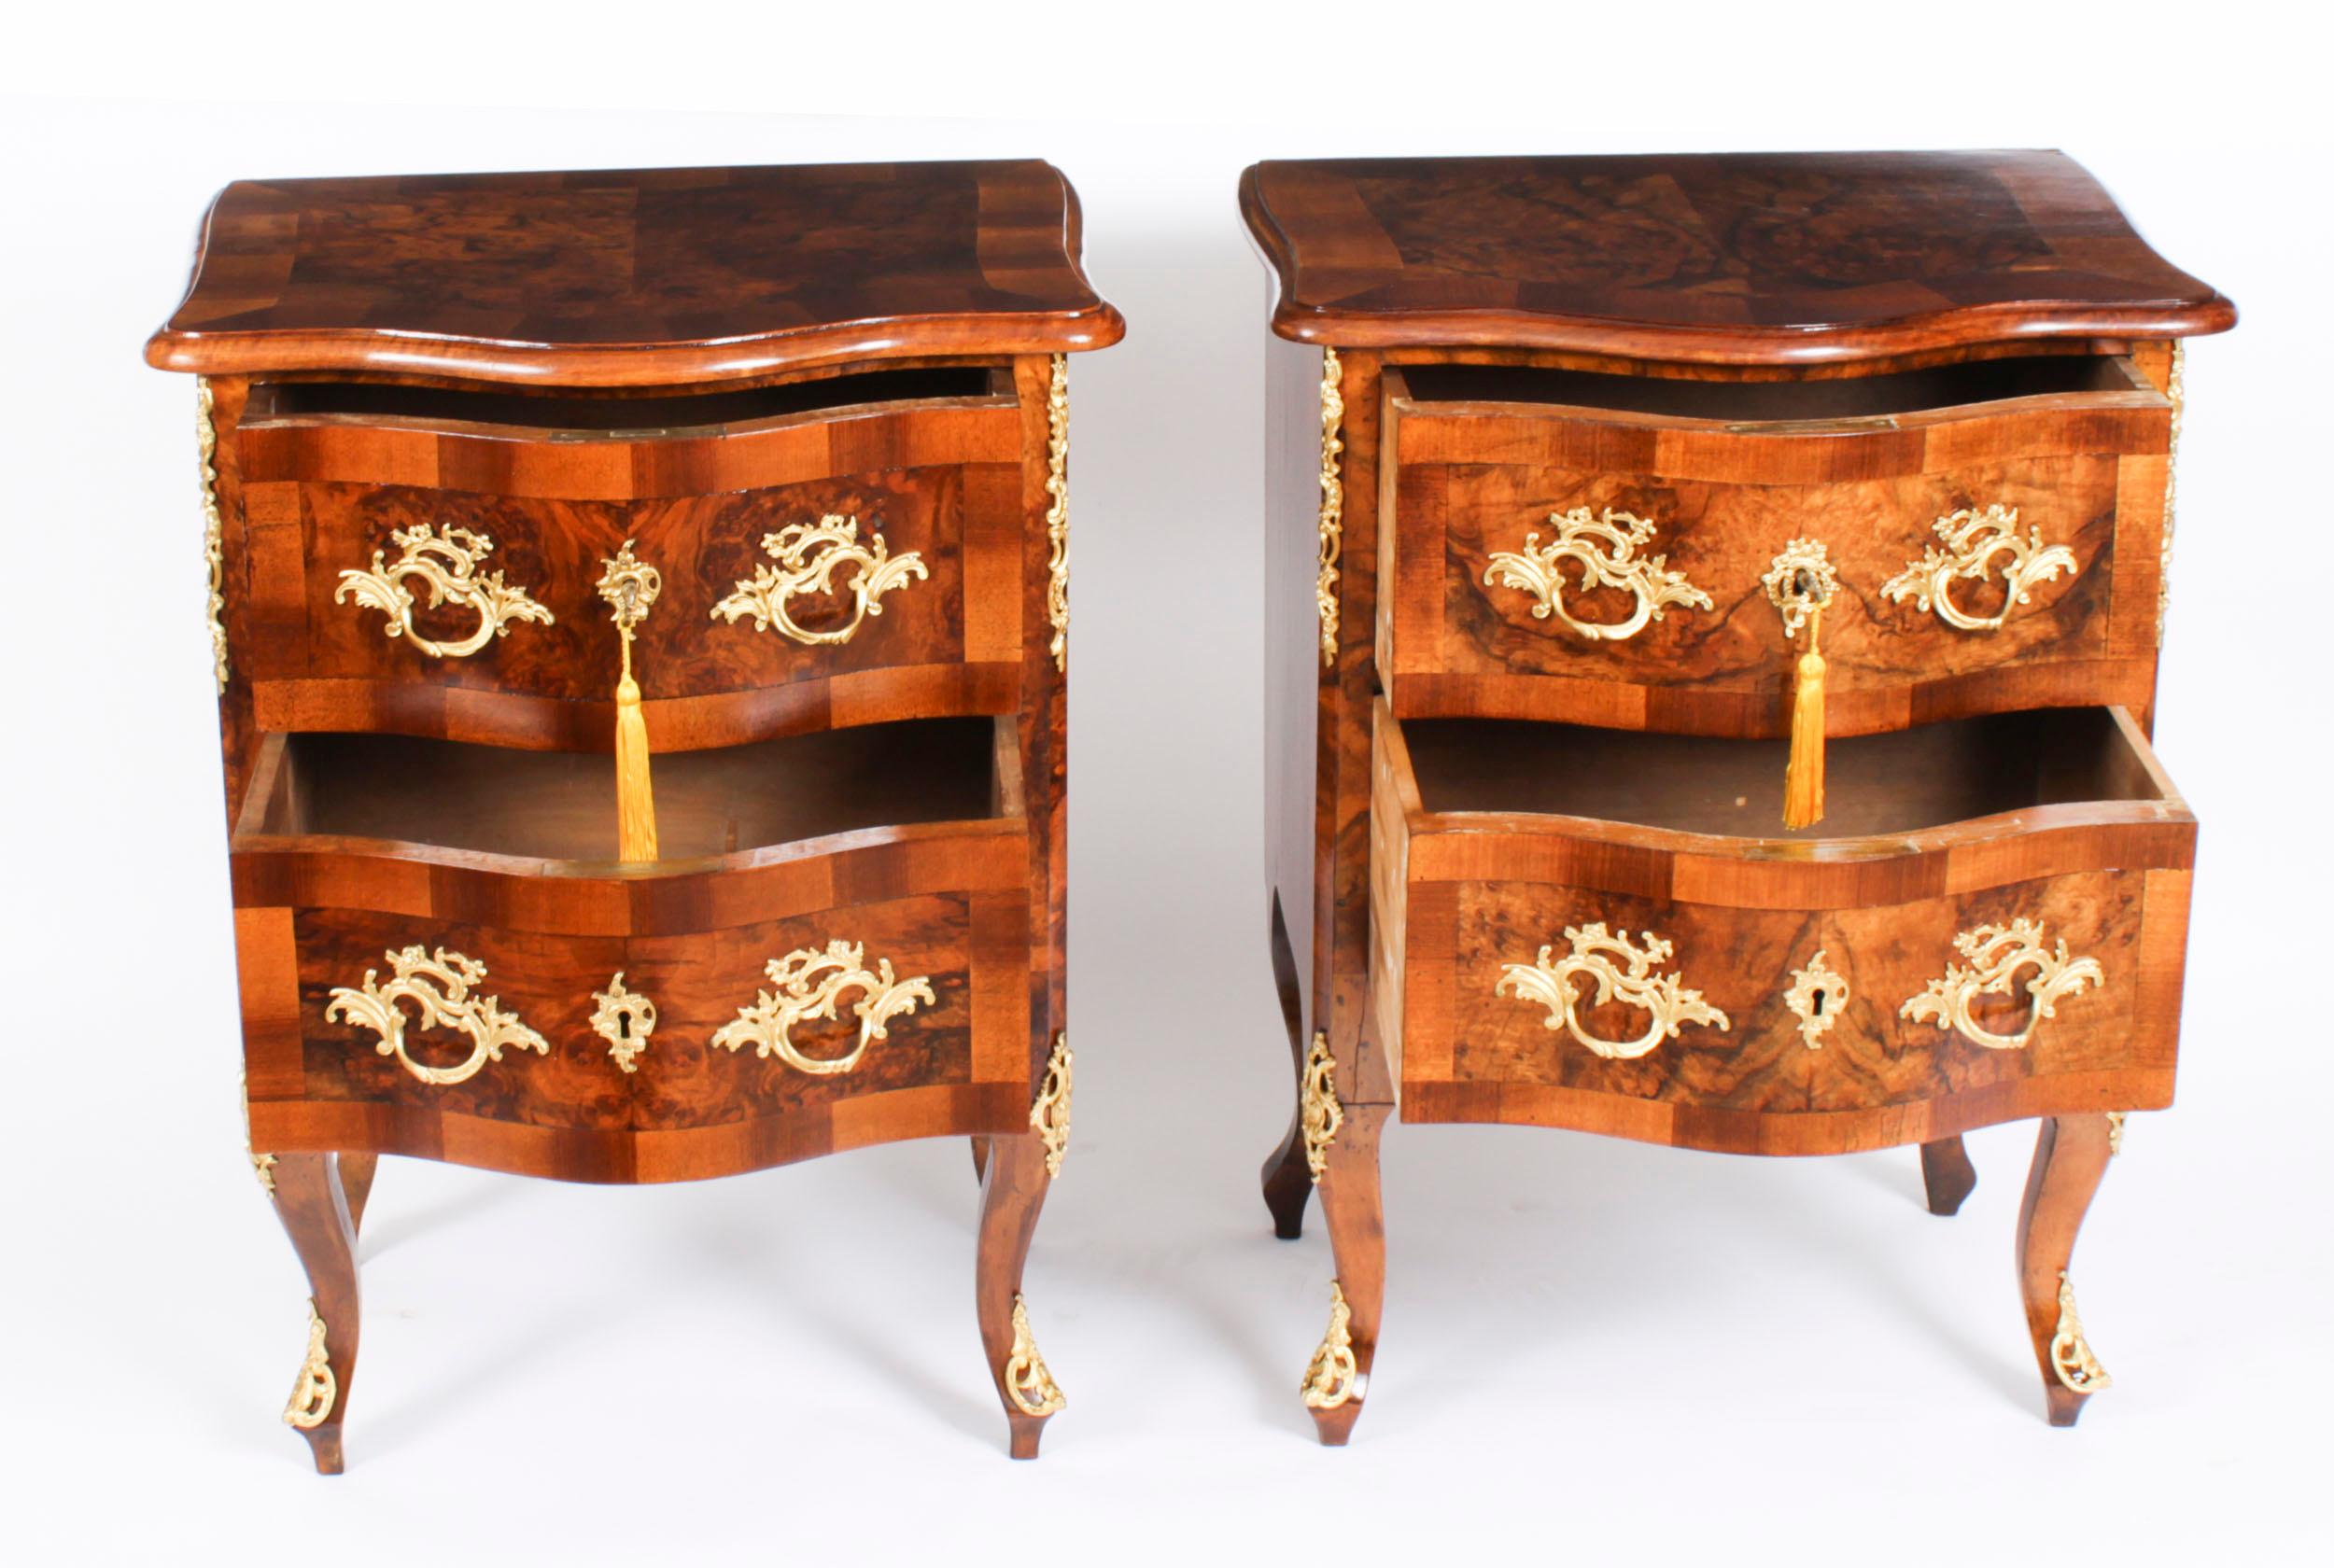 Antique Pair Italian Burr Walnut Serpentine Bedside Chests 19th Century For Sale 4